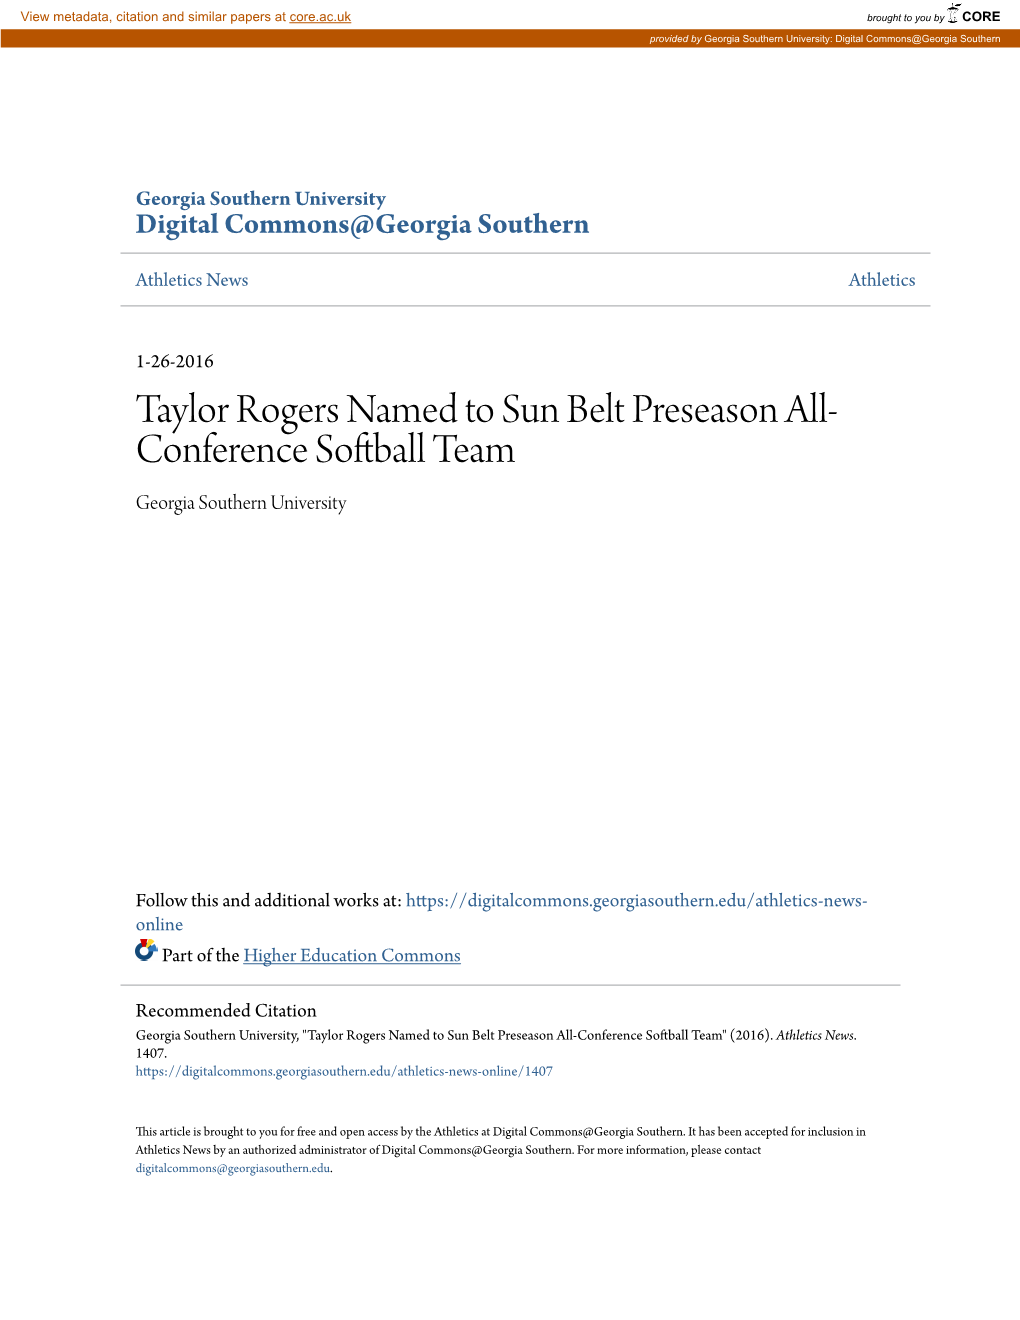 Taylor Rogers Named to Sun Belt Preseason All-Conference Softball Team" (2016)